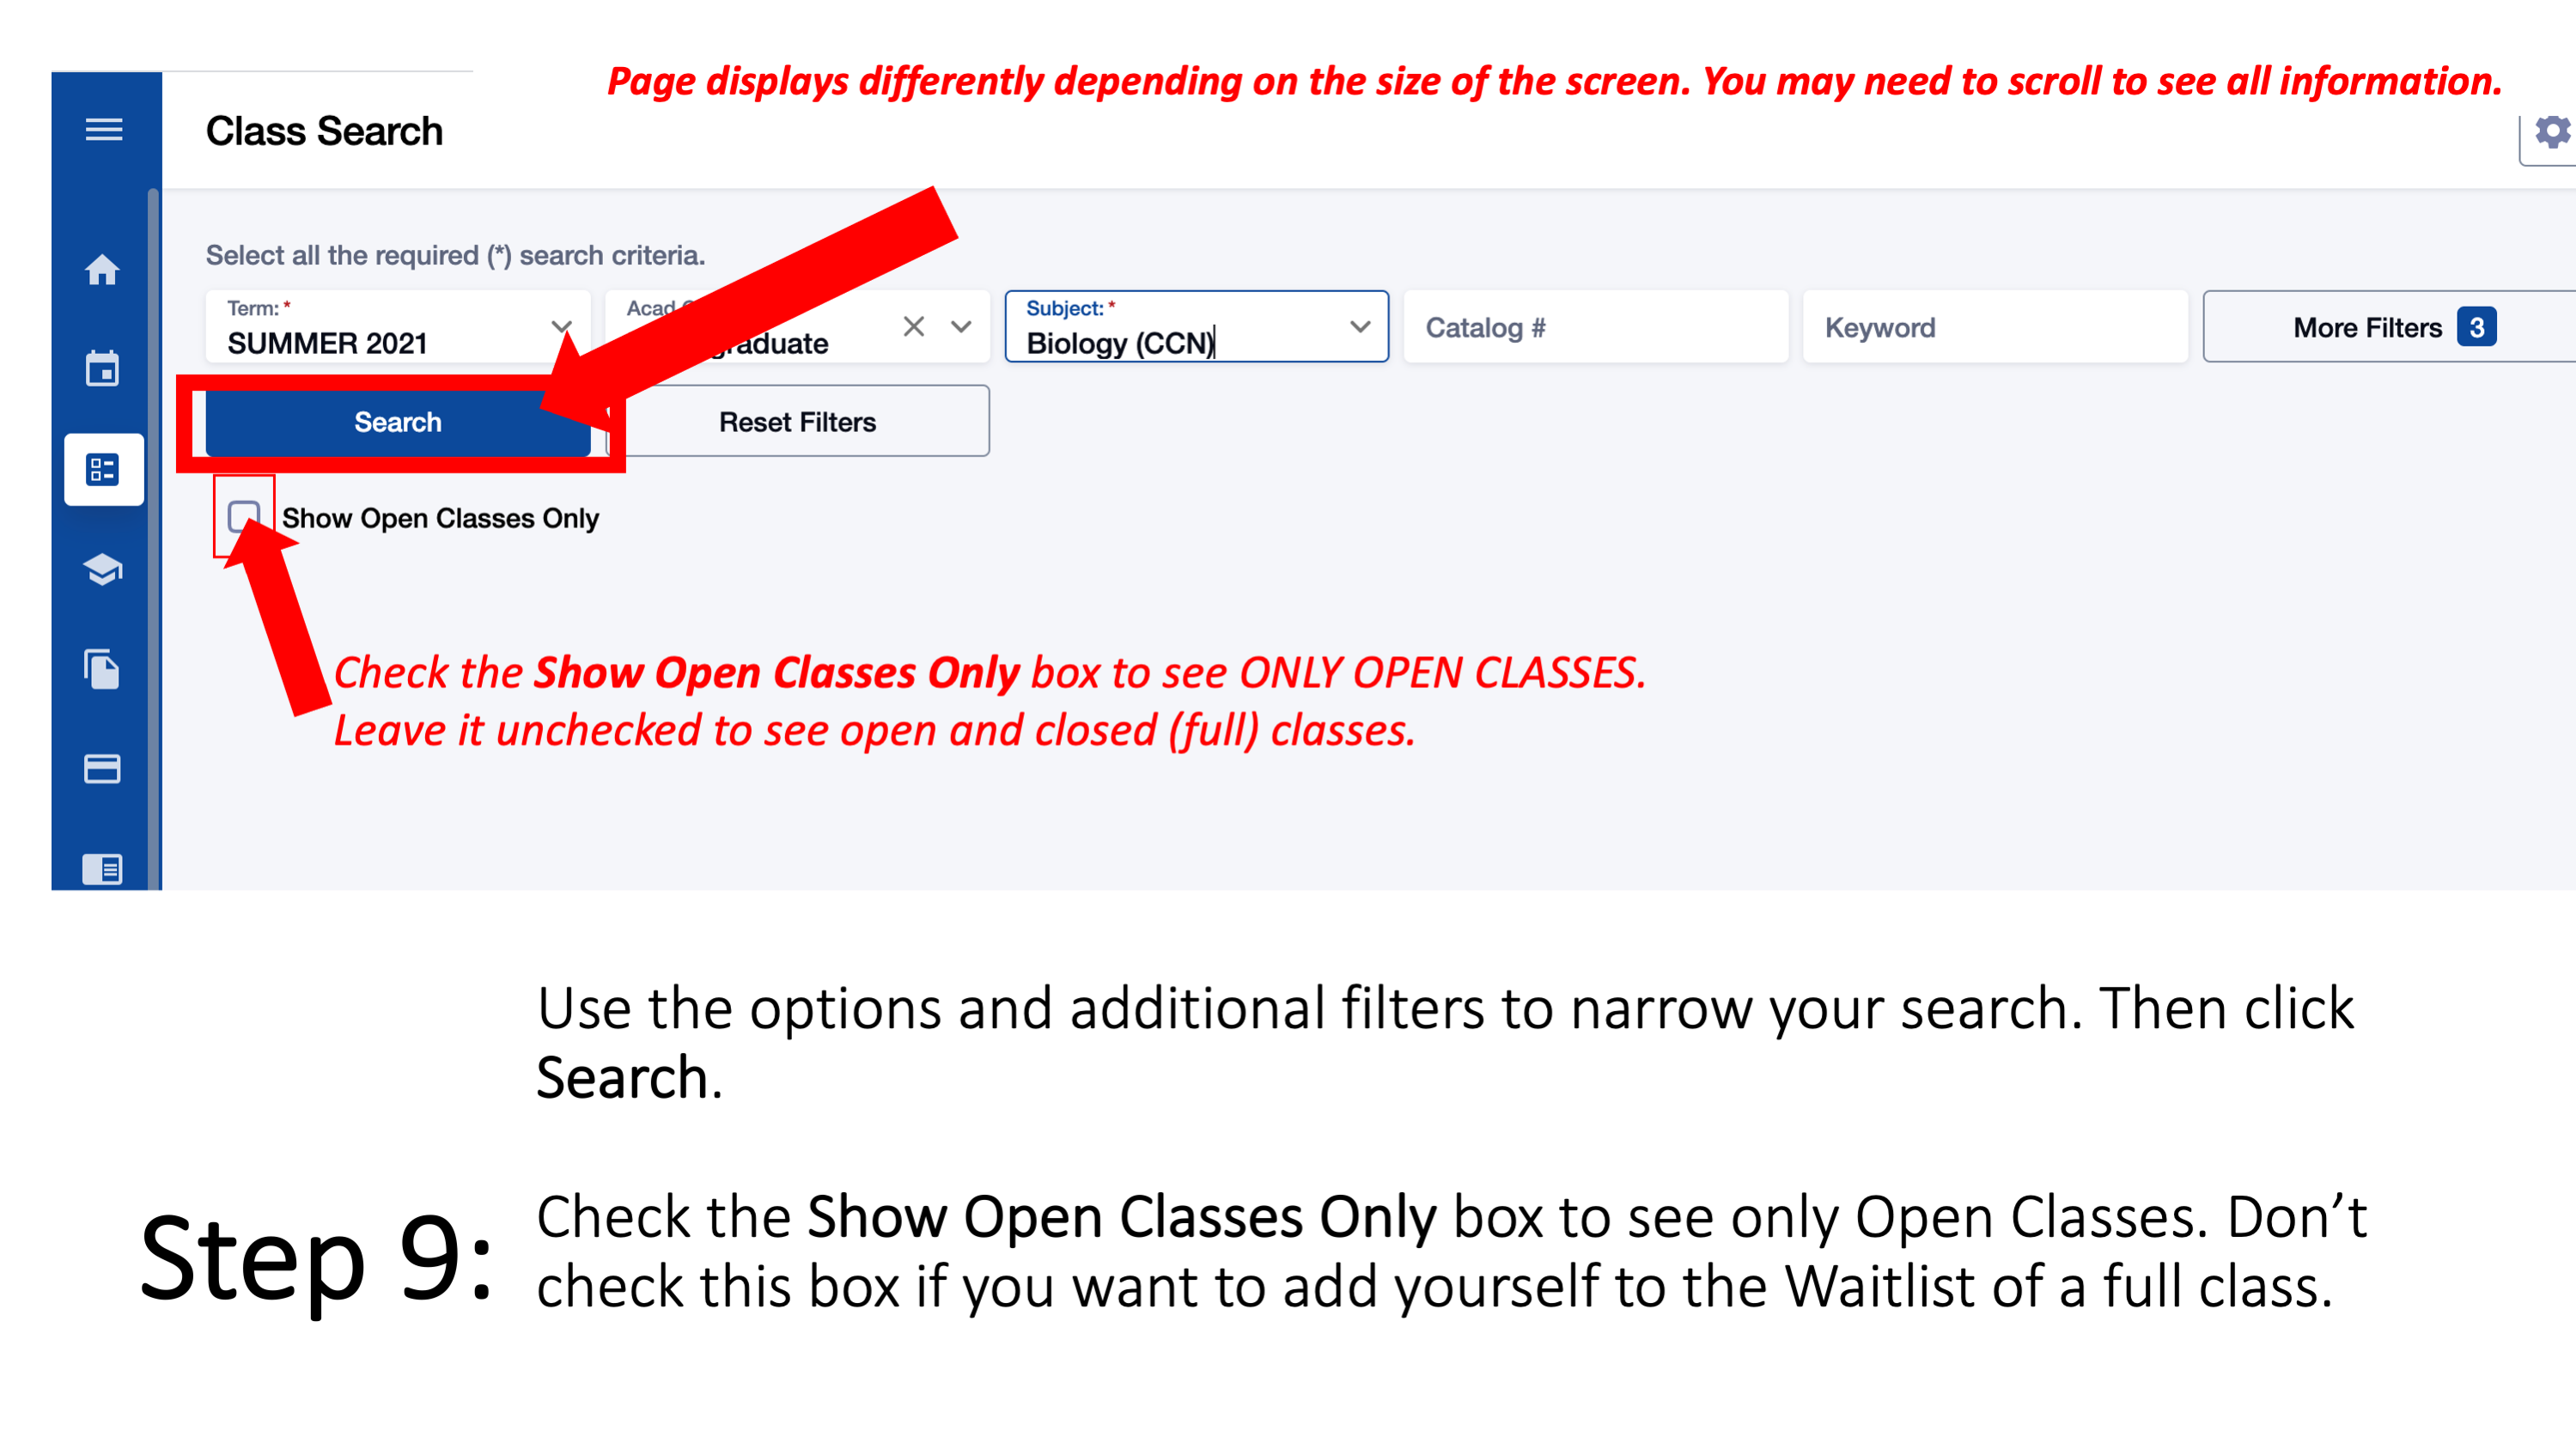 Step 9: Use the options and additional filters to narrow your search. Then click Search. Check the Show Open Classes Only box to see only Open Classes. Don’t check this box if you want to add yourself to the Waitlist of a full class. Page displays differently depending on the size of the screen. You may need to scroll to see all information.